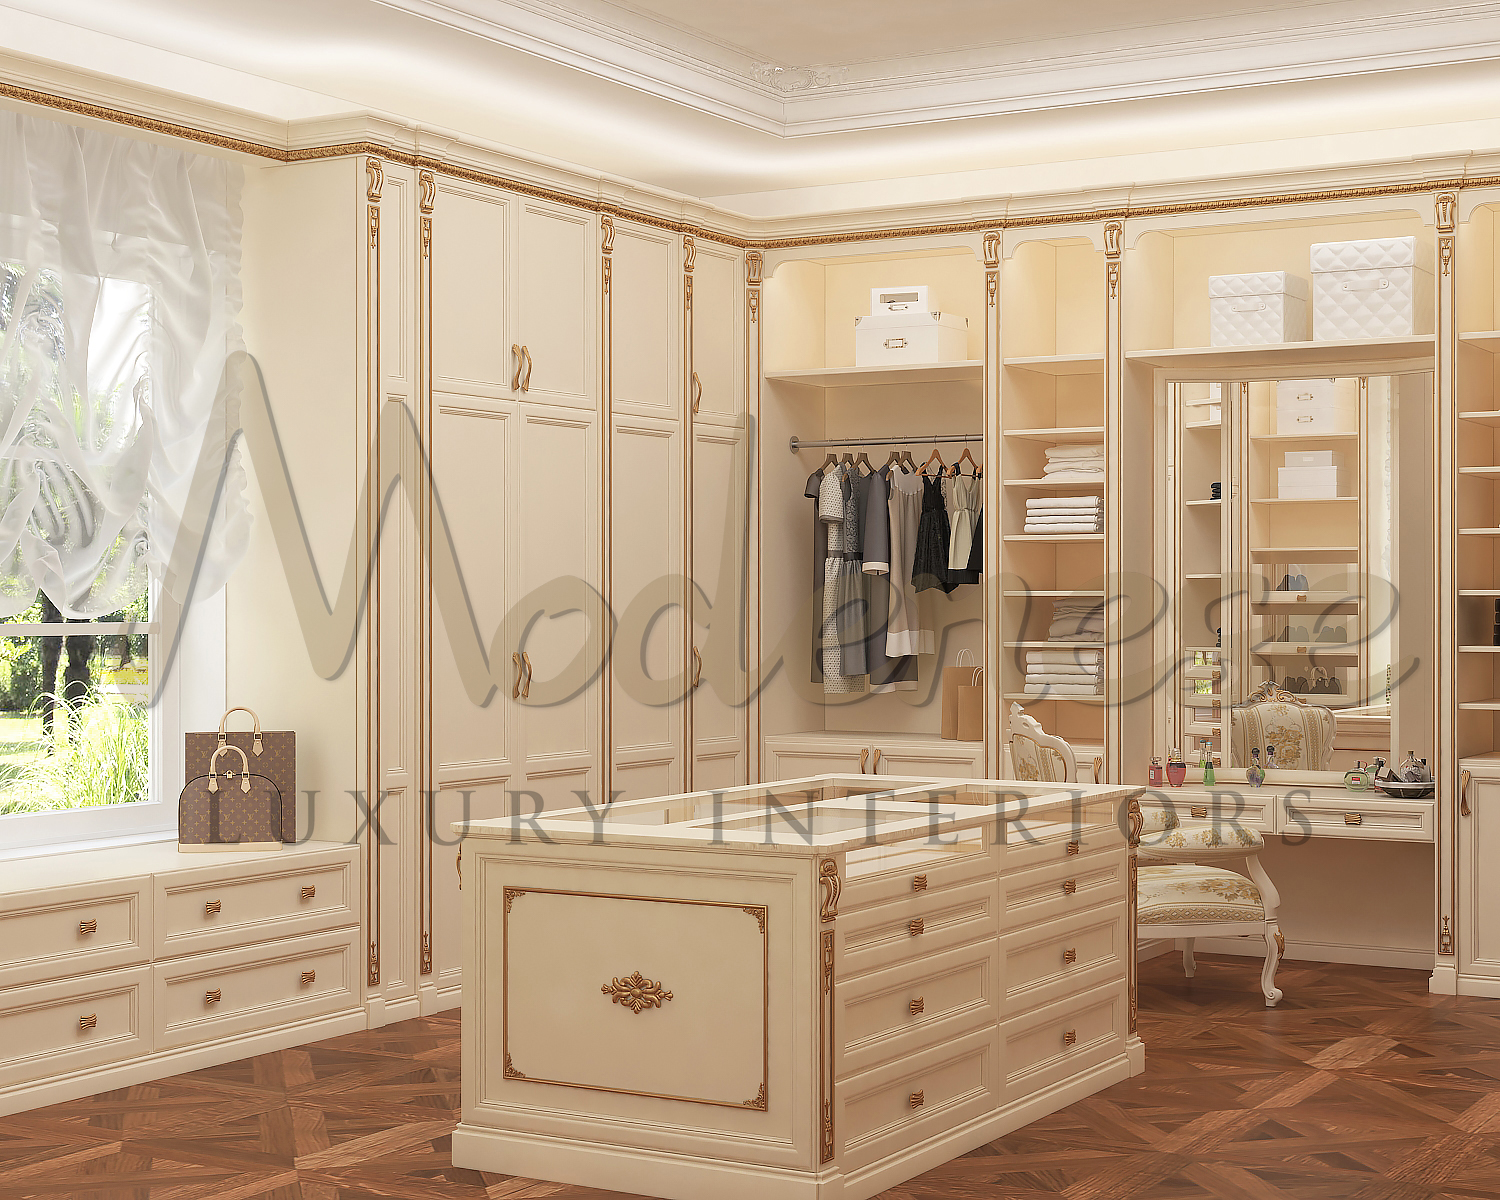 Best joinery service, elegant handcrafted furniture. Classy wardrobe design. Classic furniture manufacturing in Italy